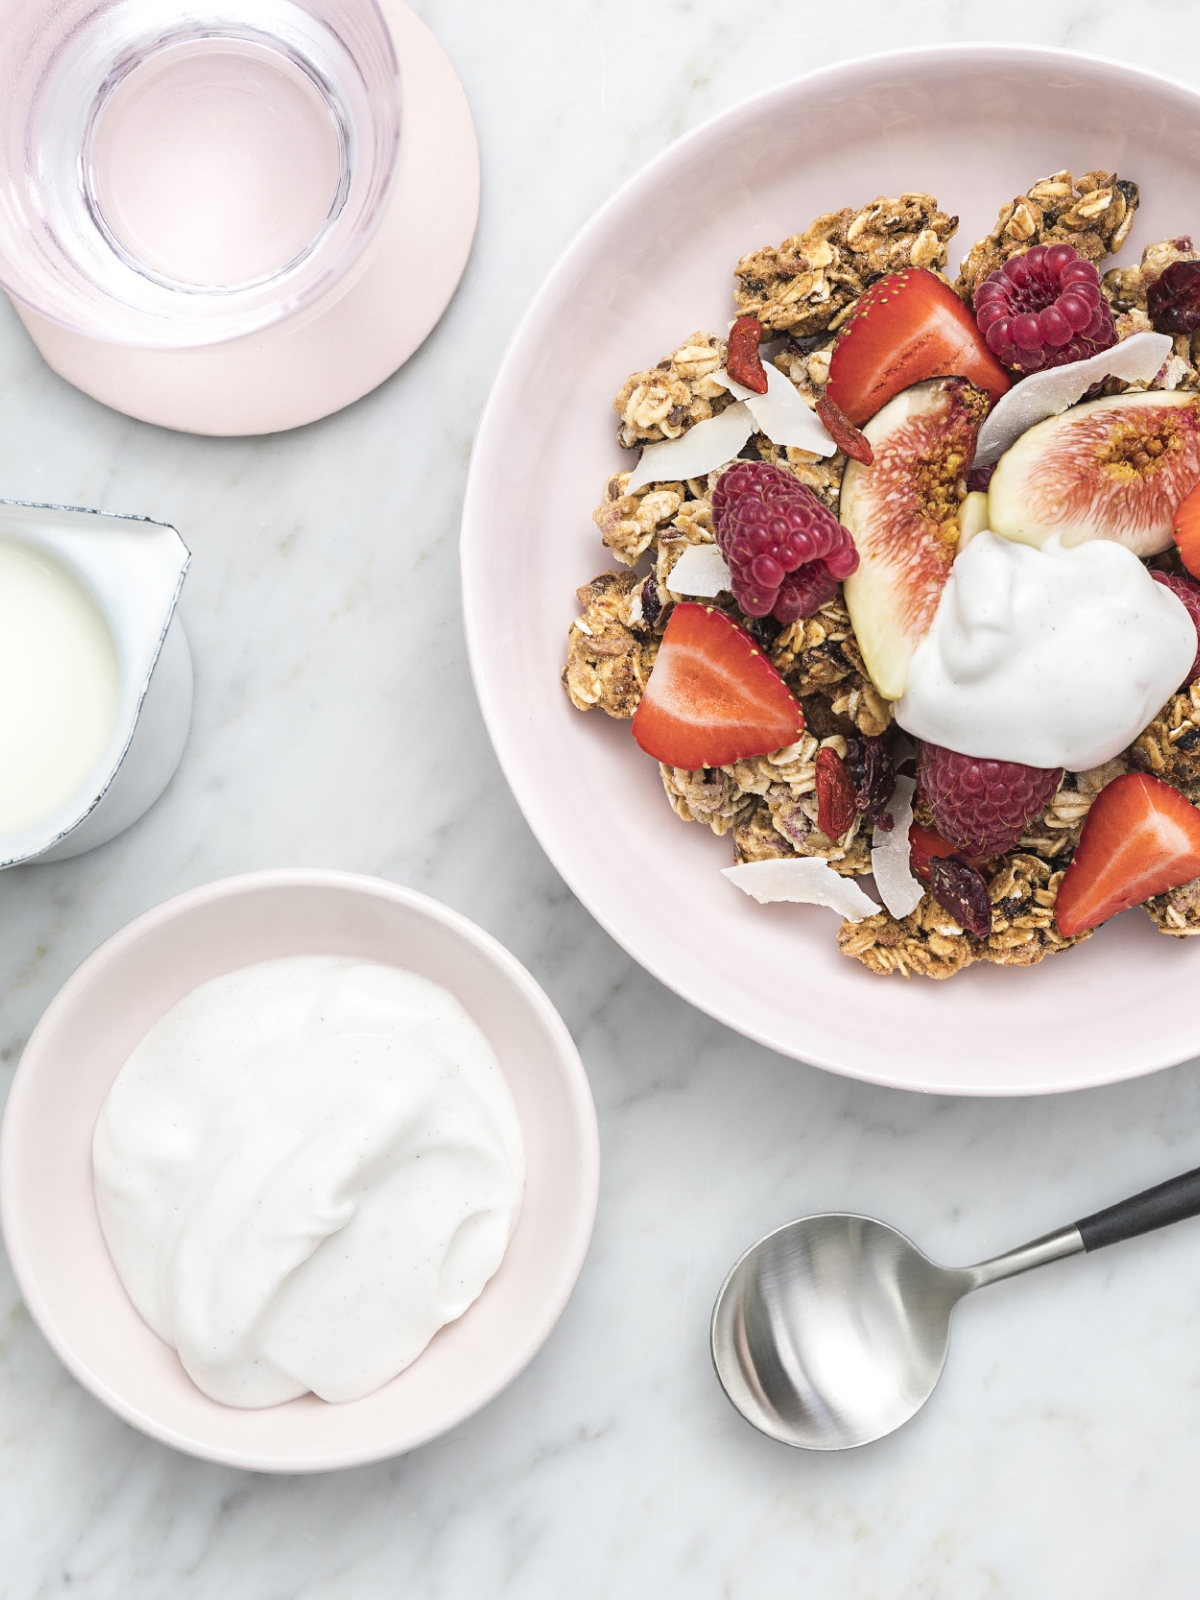 A bowl of granola, strawberries, raspberries, and coconut with a dallop of plant-based cream on top